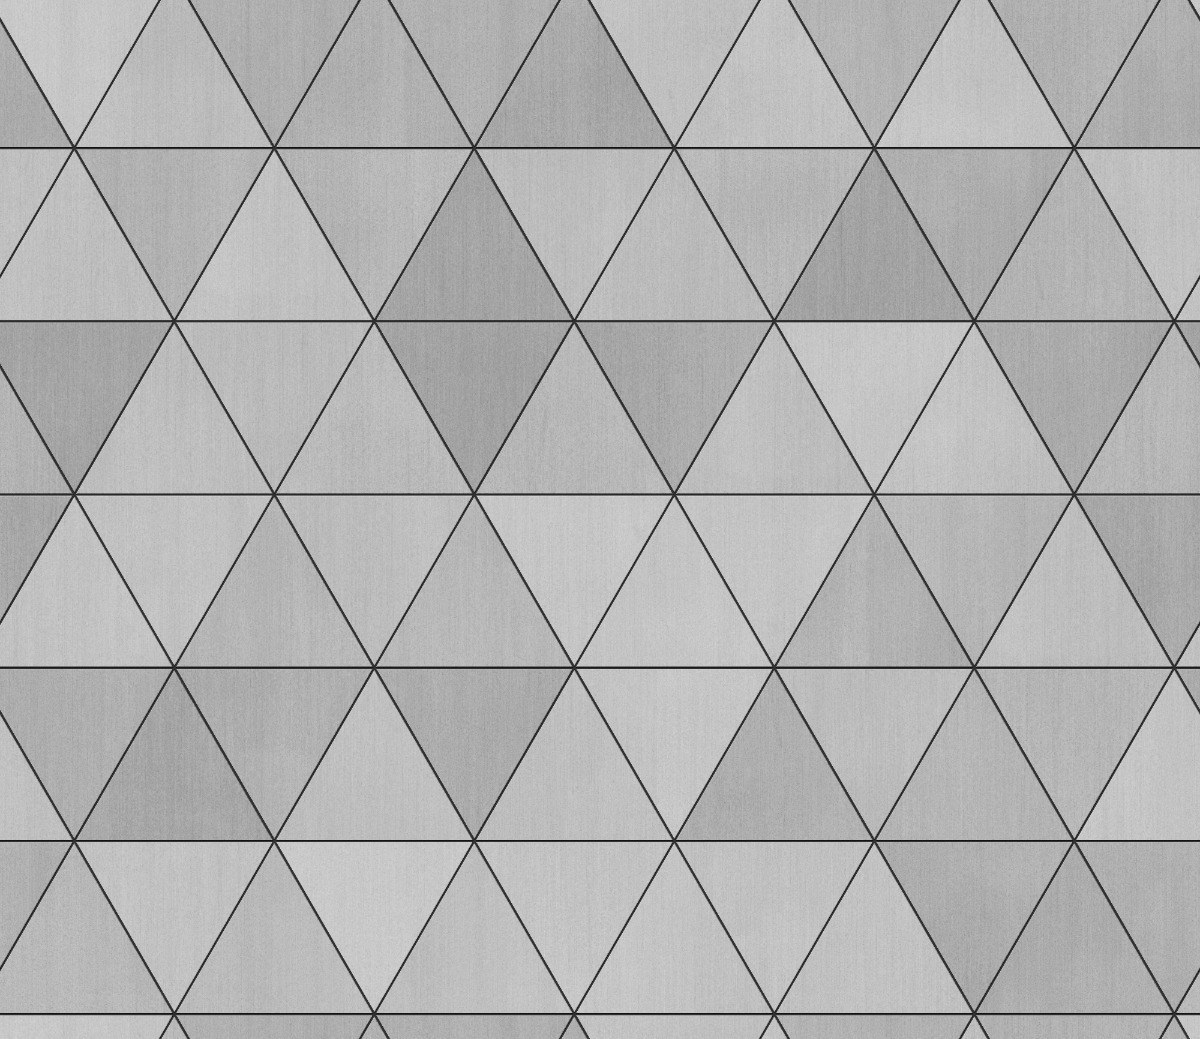 A seamless metal texture with aluminium sheets arranged in a Isosceles pattern